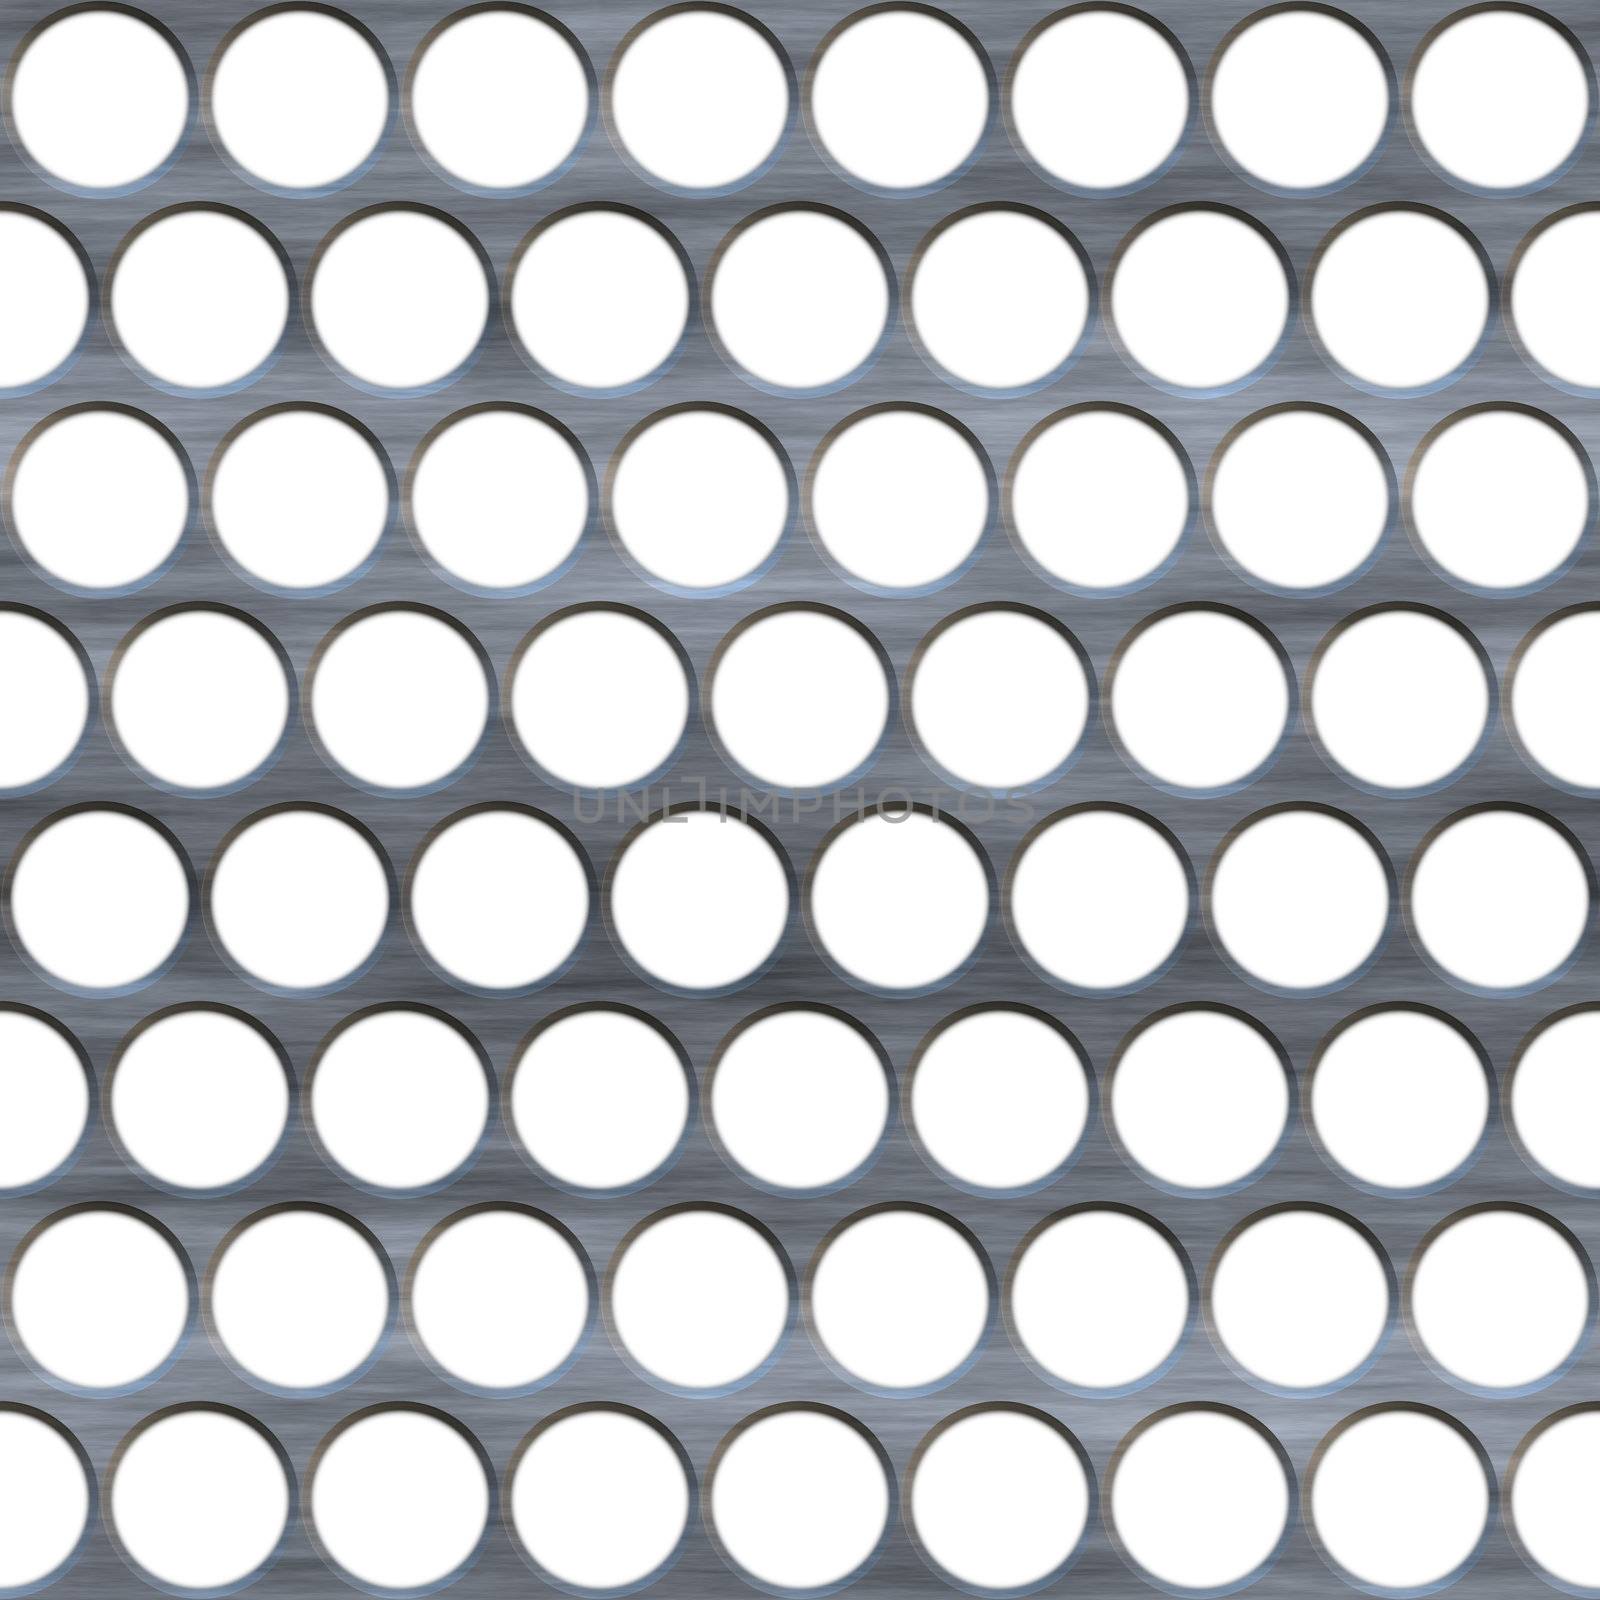 Metal Grille by graficallyminded